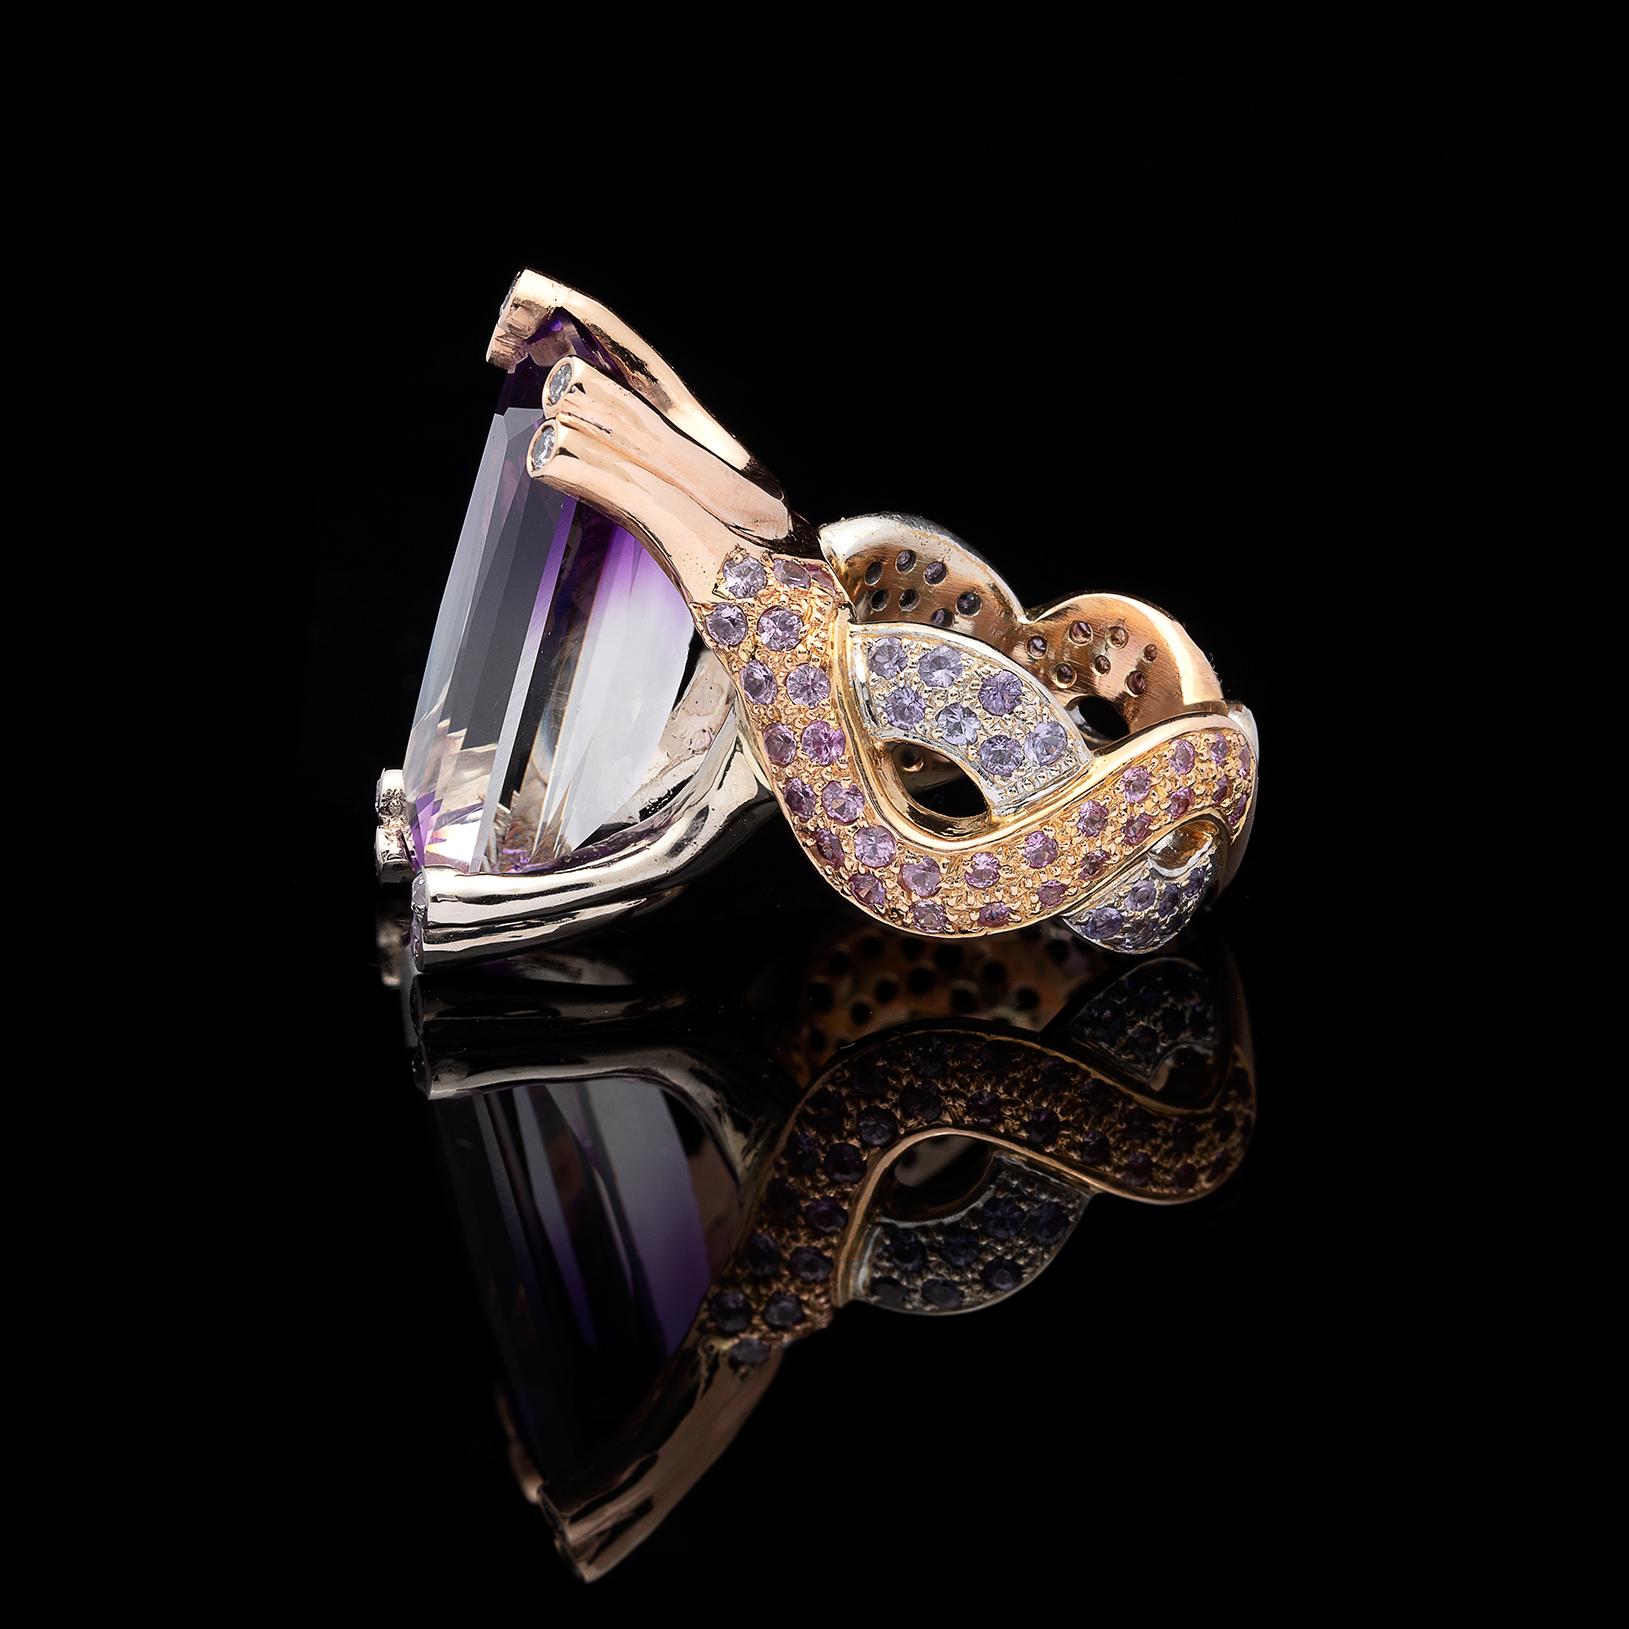 Custom designed and handmade, this ring features a unique bi-color rectangular-cut 20-cts. amethyst, displaying purple and white flashes of color. The 18k rose and white gold snaked mounting is pave-set with 88 round pink and purple sapphires, and